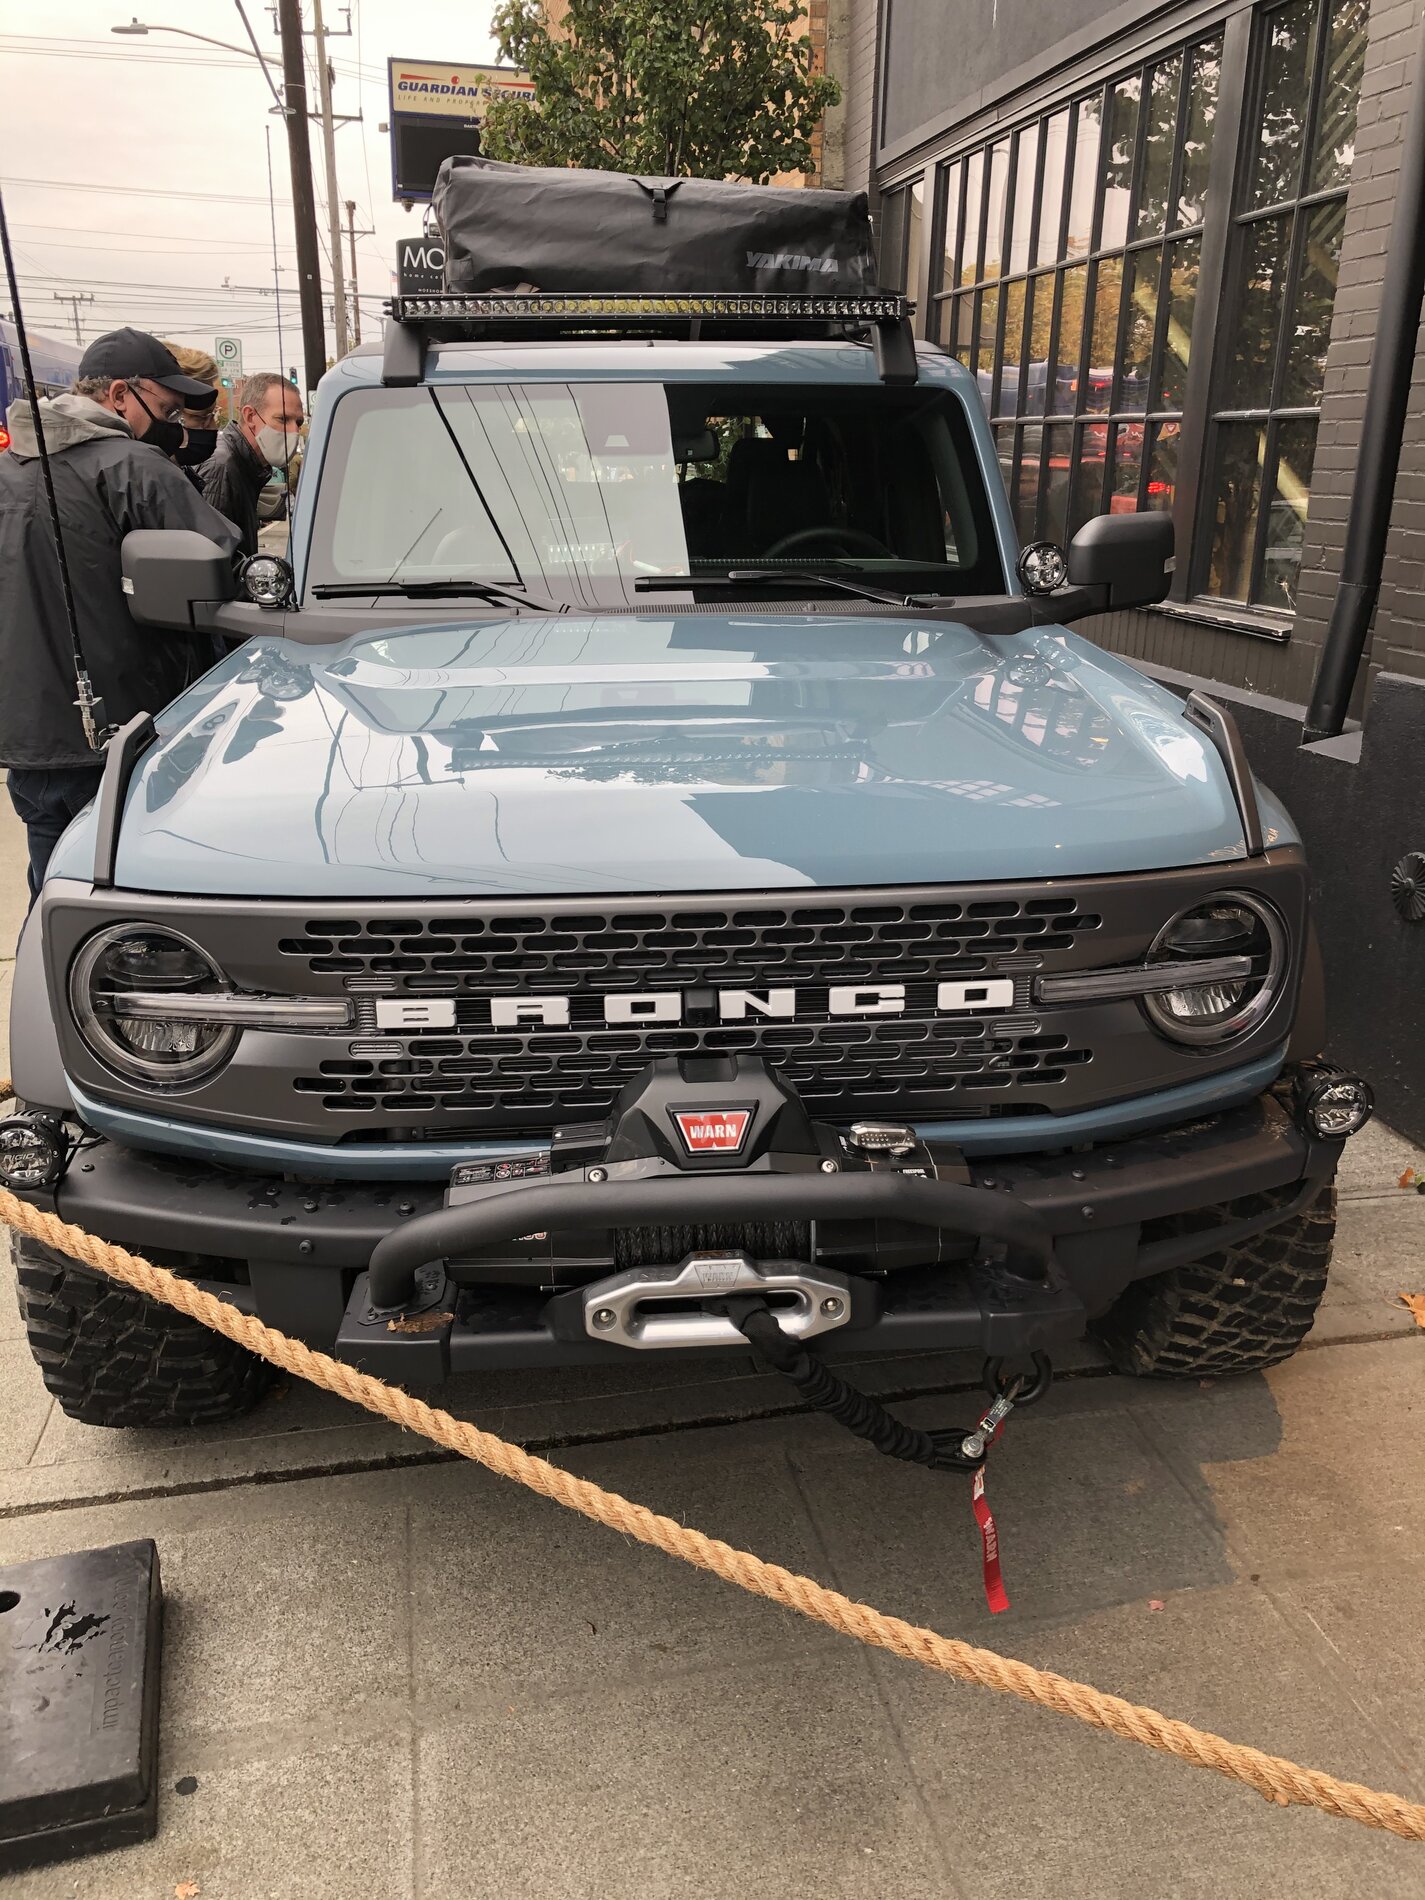 Ford Bronco Filson Bronco Fire Rig and Overland Badlands Concept @ Seattle Event 4A54F3D8-EB63-4A1A-A186-F5DD1DC665E1